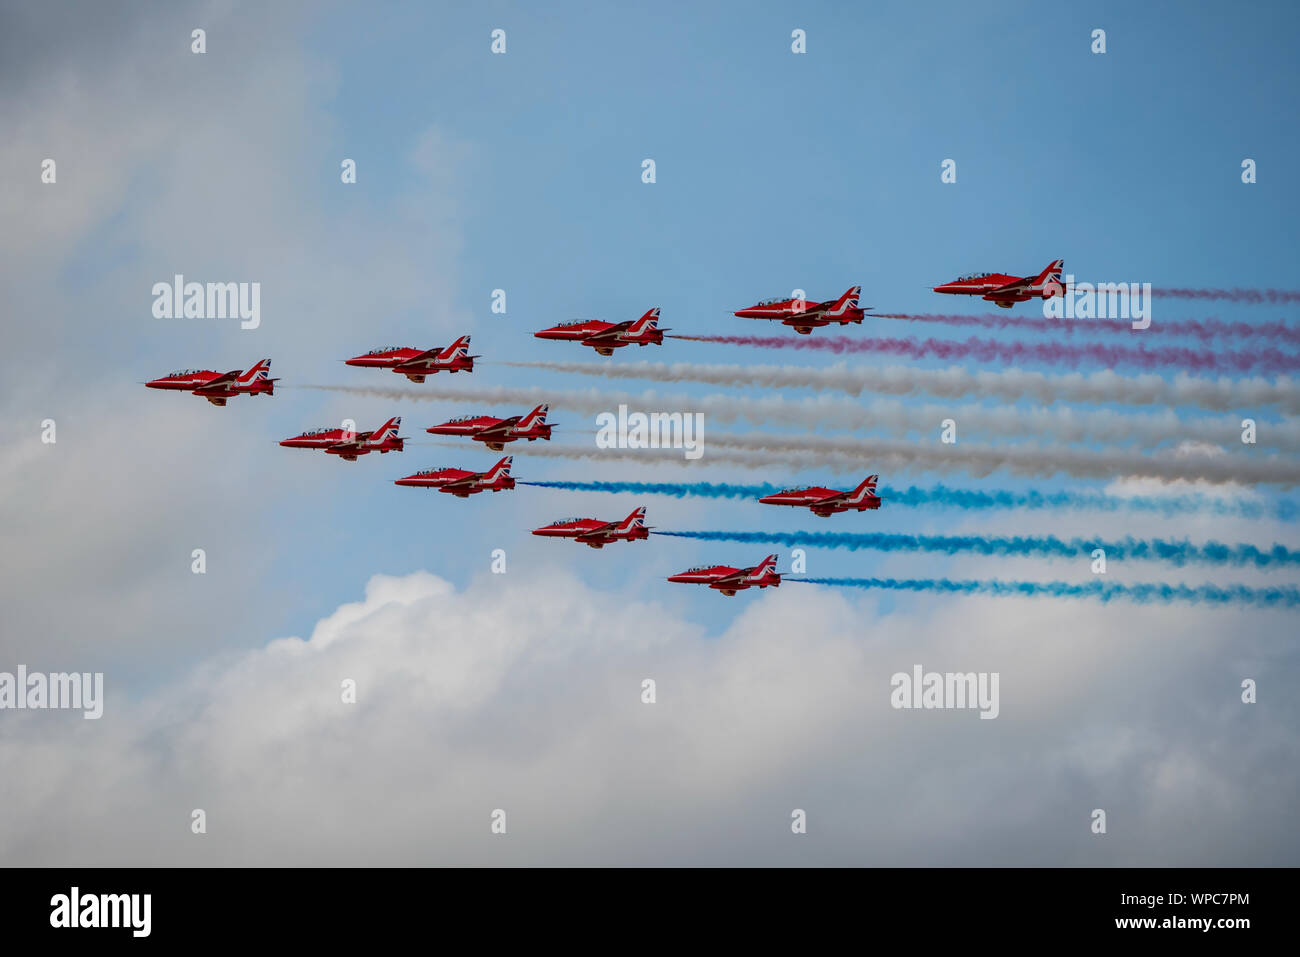 The RAF Red Arrows display team trail red, white and blue smoke in Big Battle (plus 2 aircraft) formation for RIAT 2019 at RAF Fairford on 21/7/19. Stock Photo